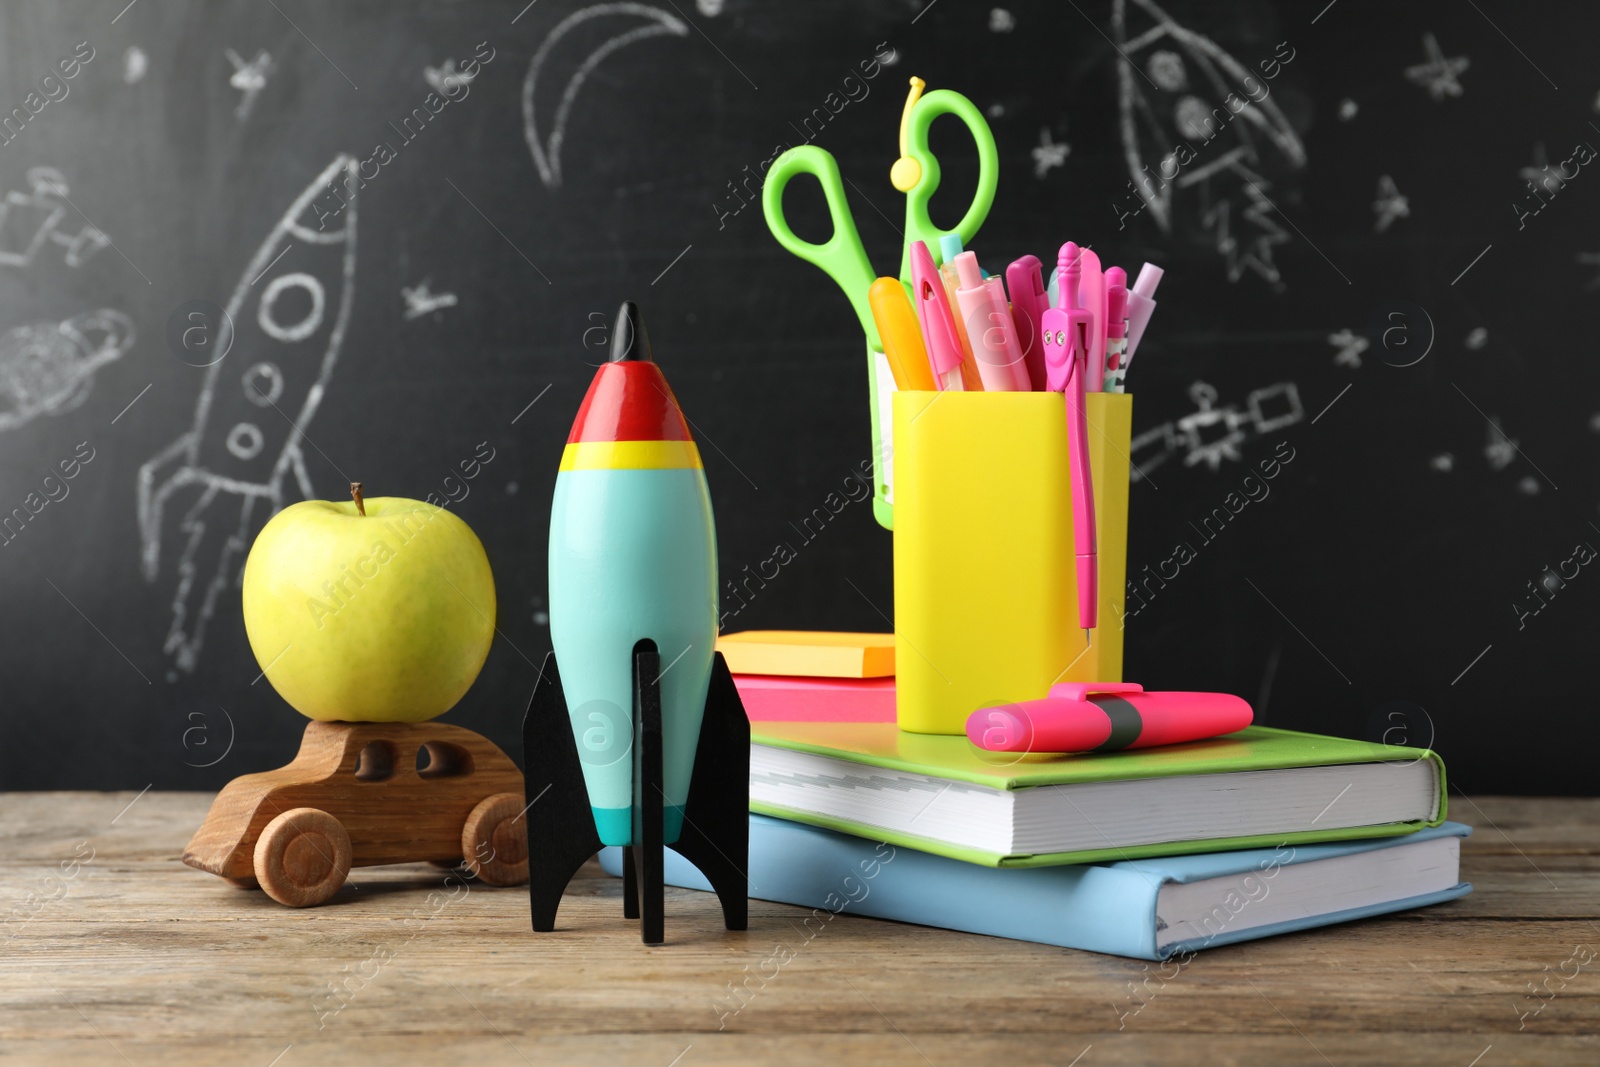 Photo of Bright toy rocket, car and school supplies on wooden table